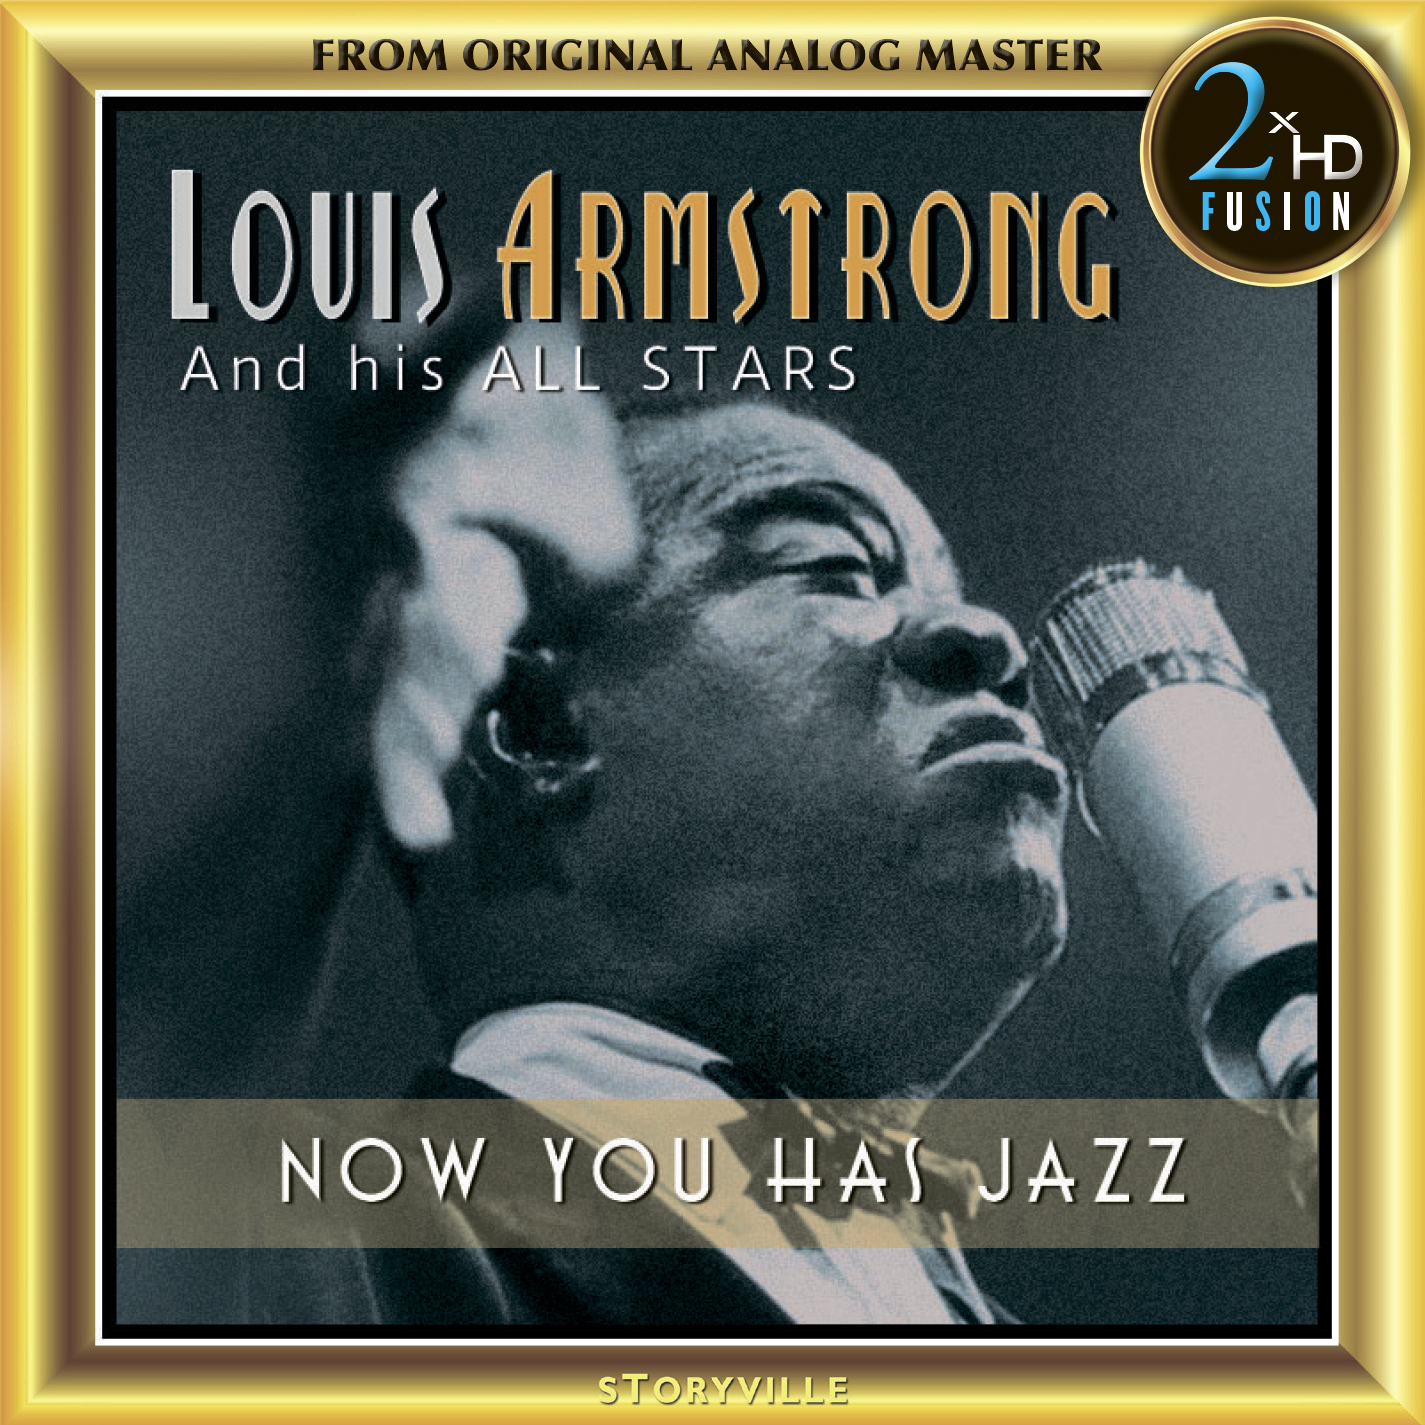 Louis Armstrong - Now You Has Jazz (2018) [HDTracks DSF DSD128/5.64MHz + FLAC 24bit/96kHz]